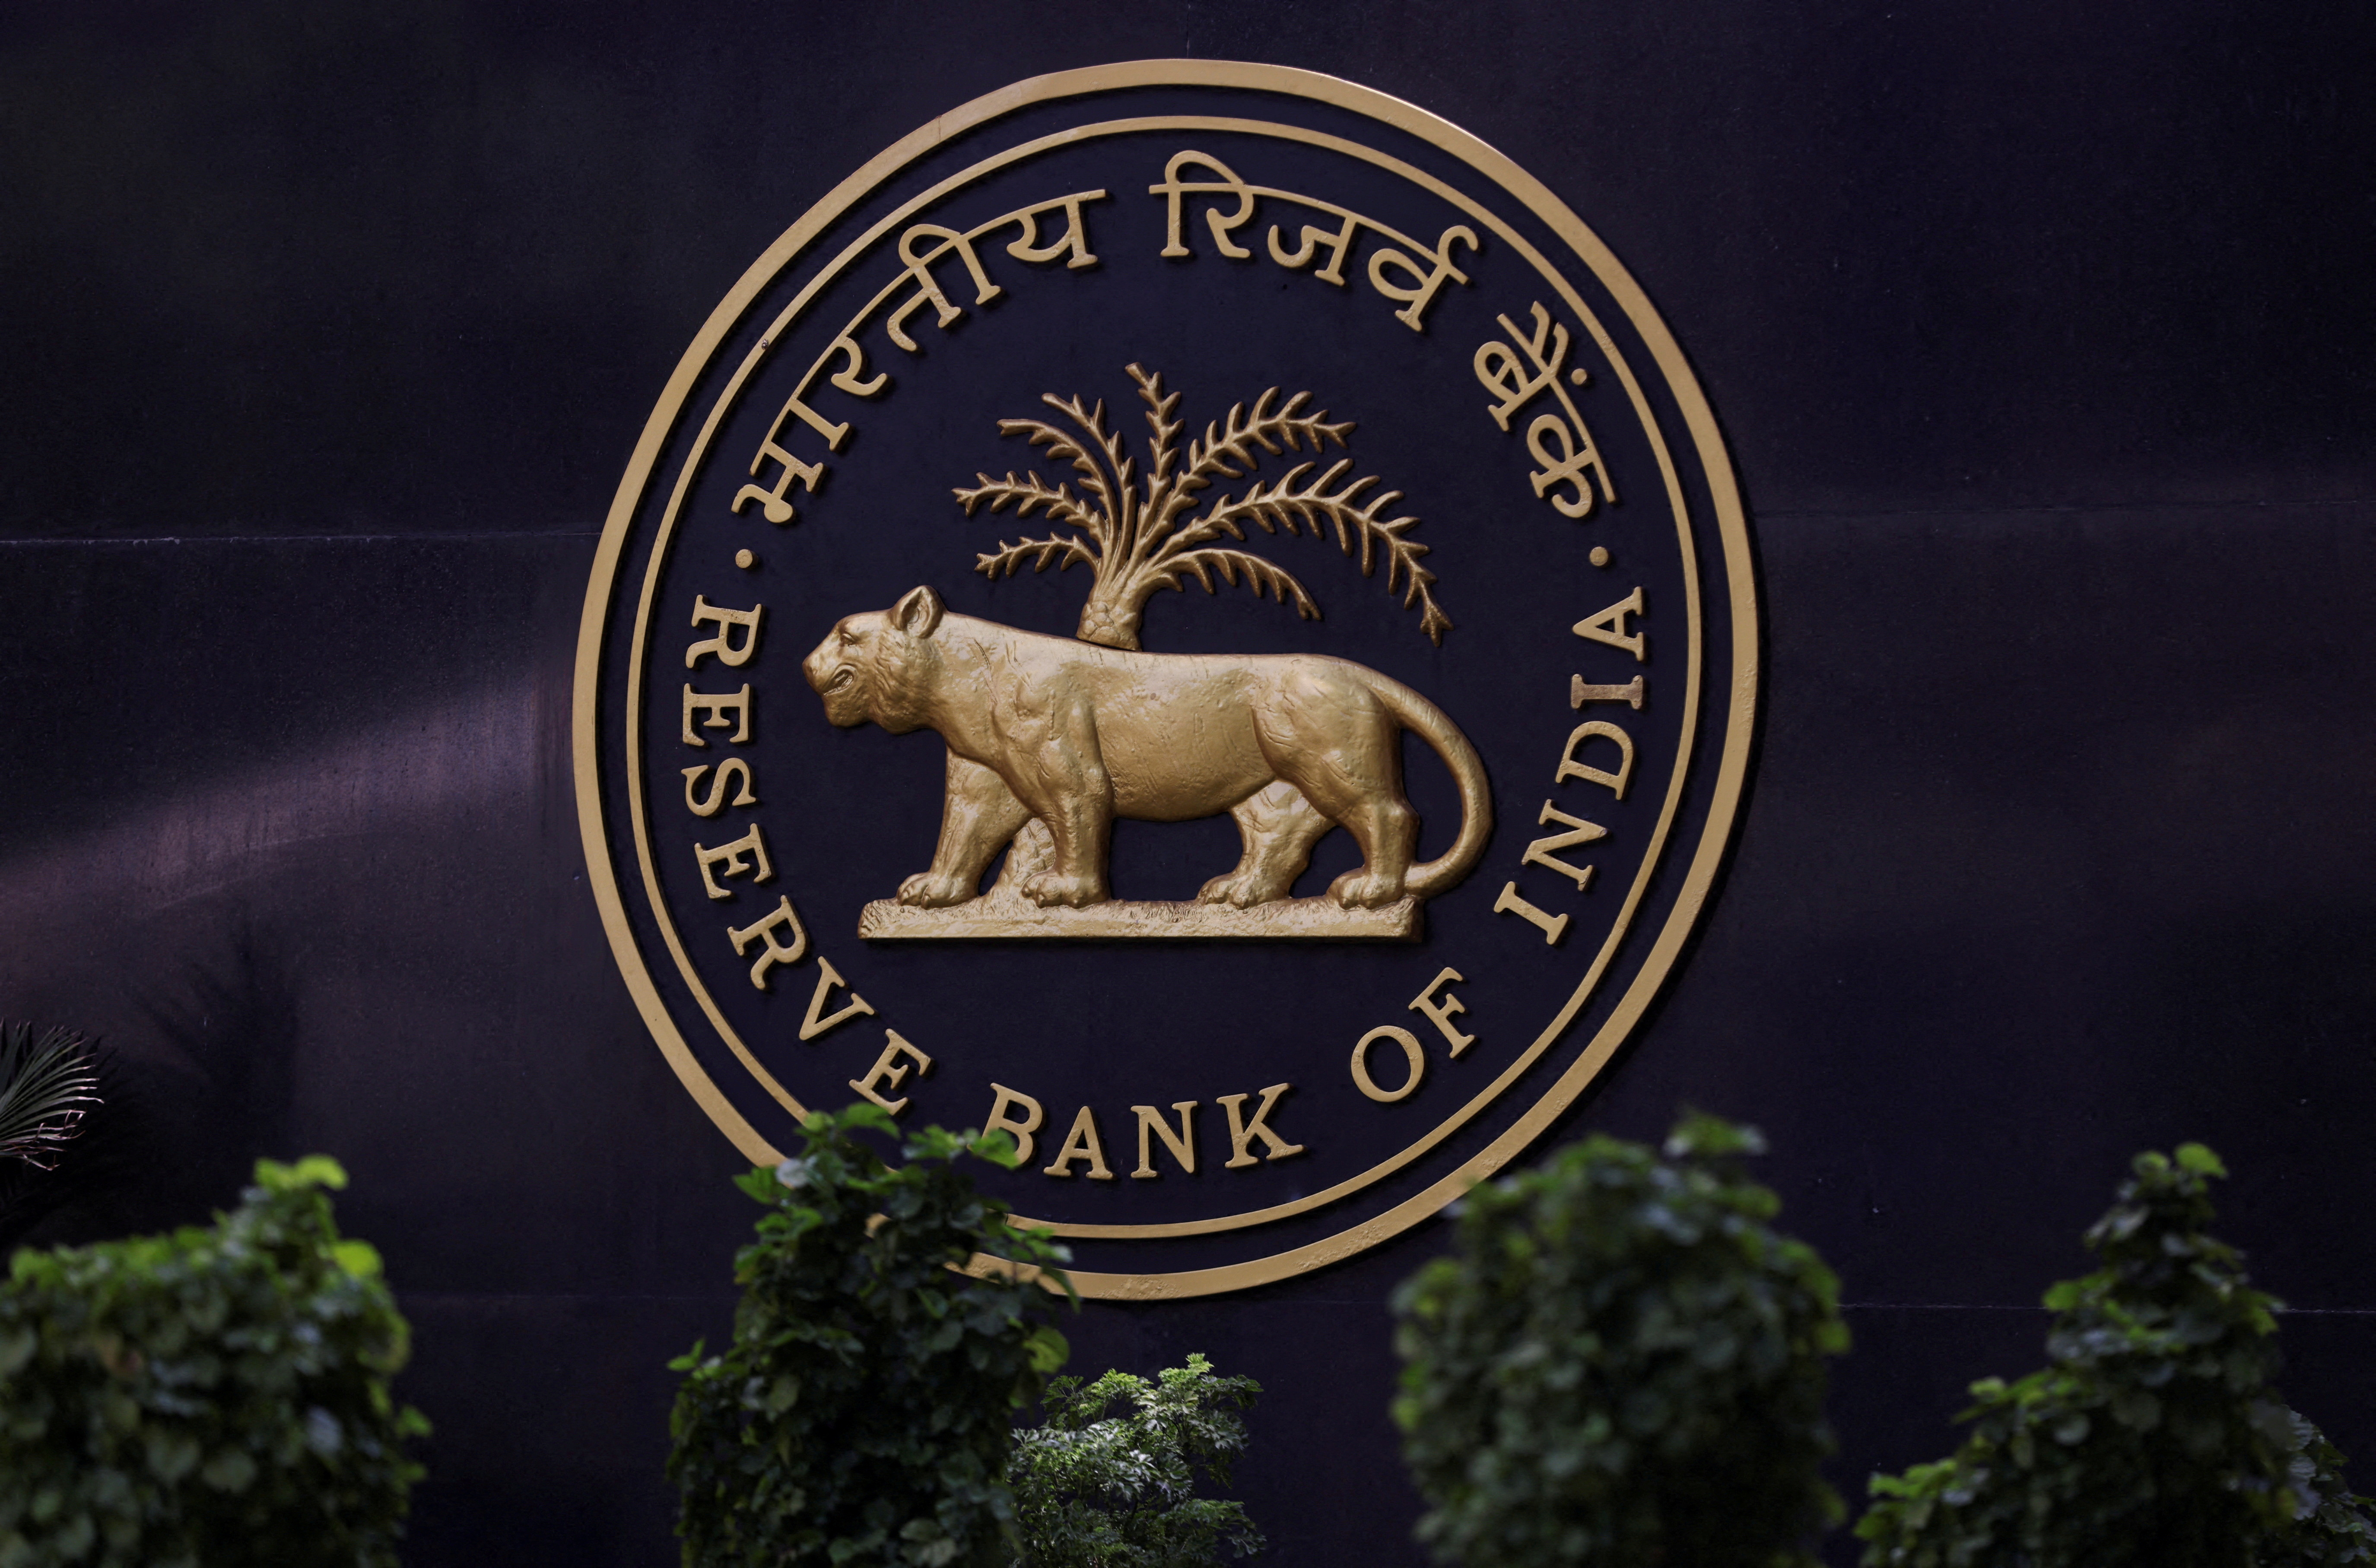 A Reserve Bank of India (RBI) logo is seen inside its headquarters in Mumbai, India